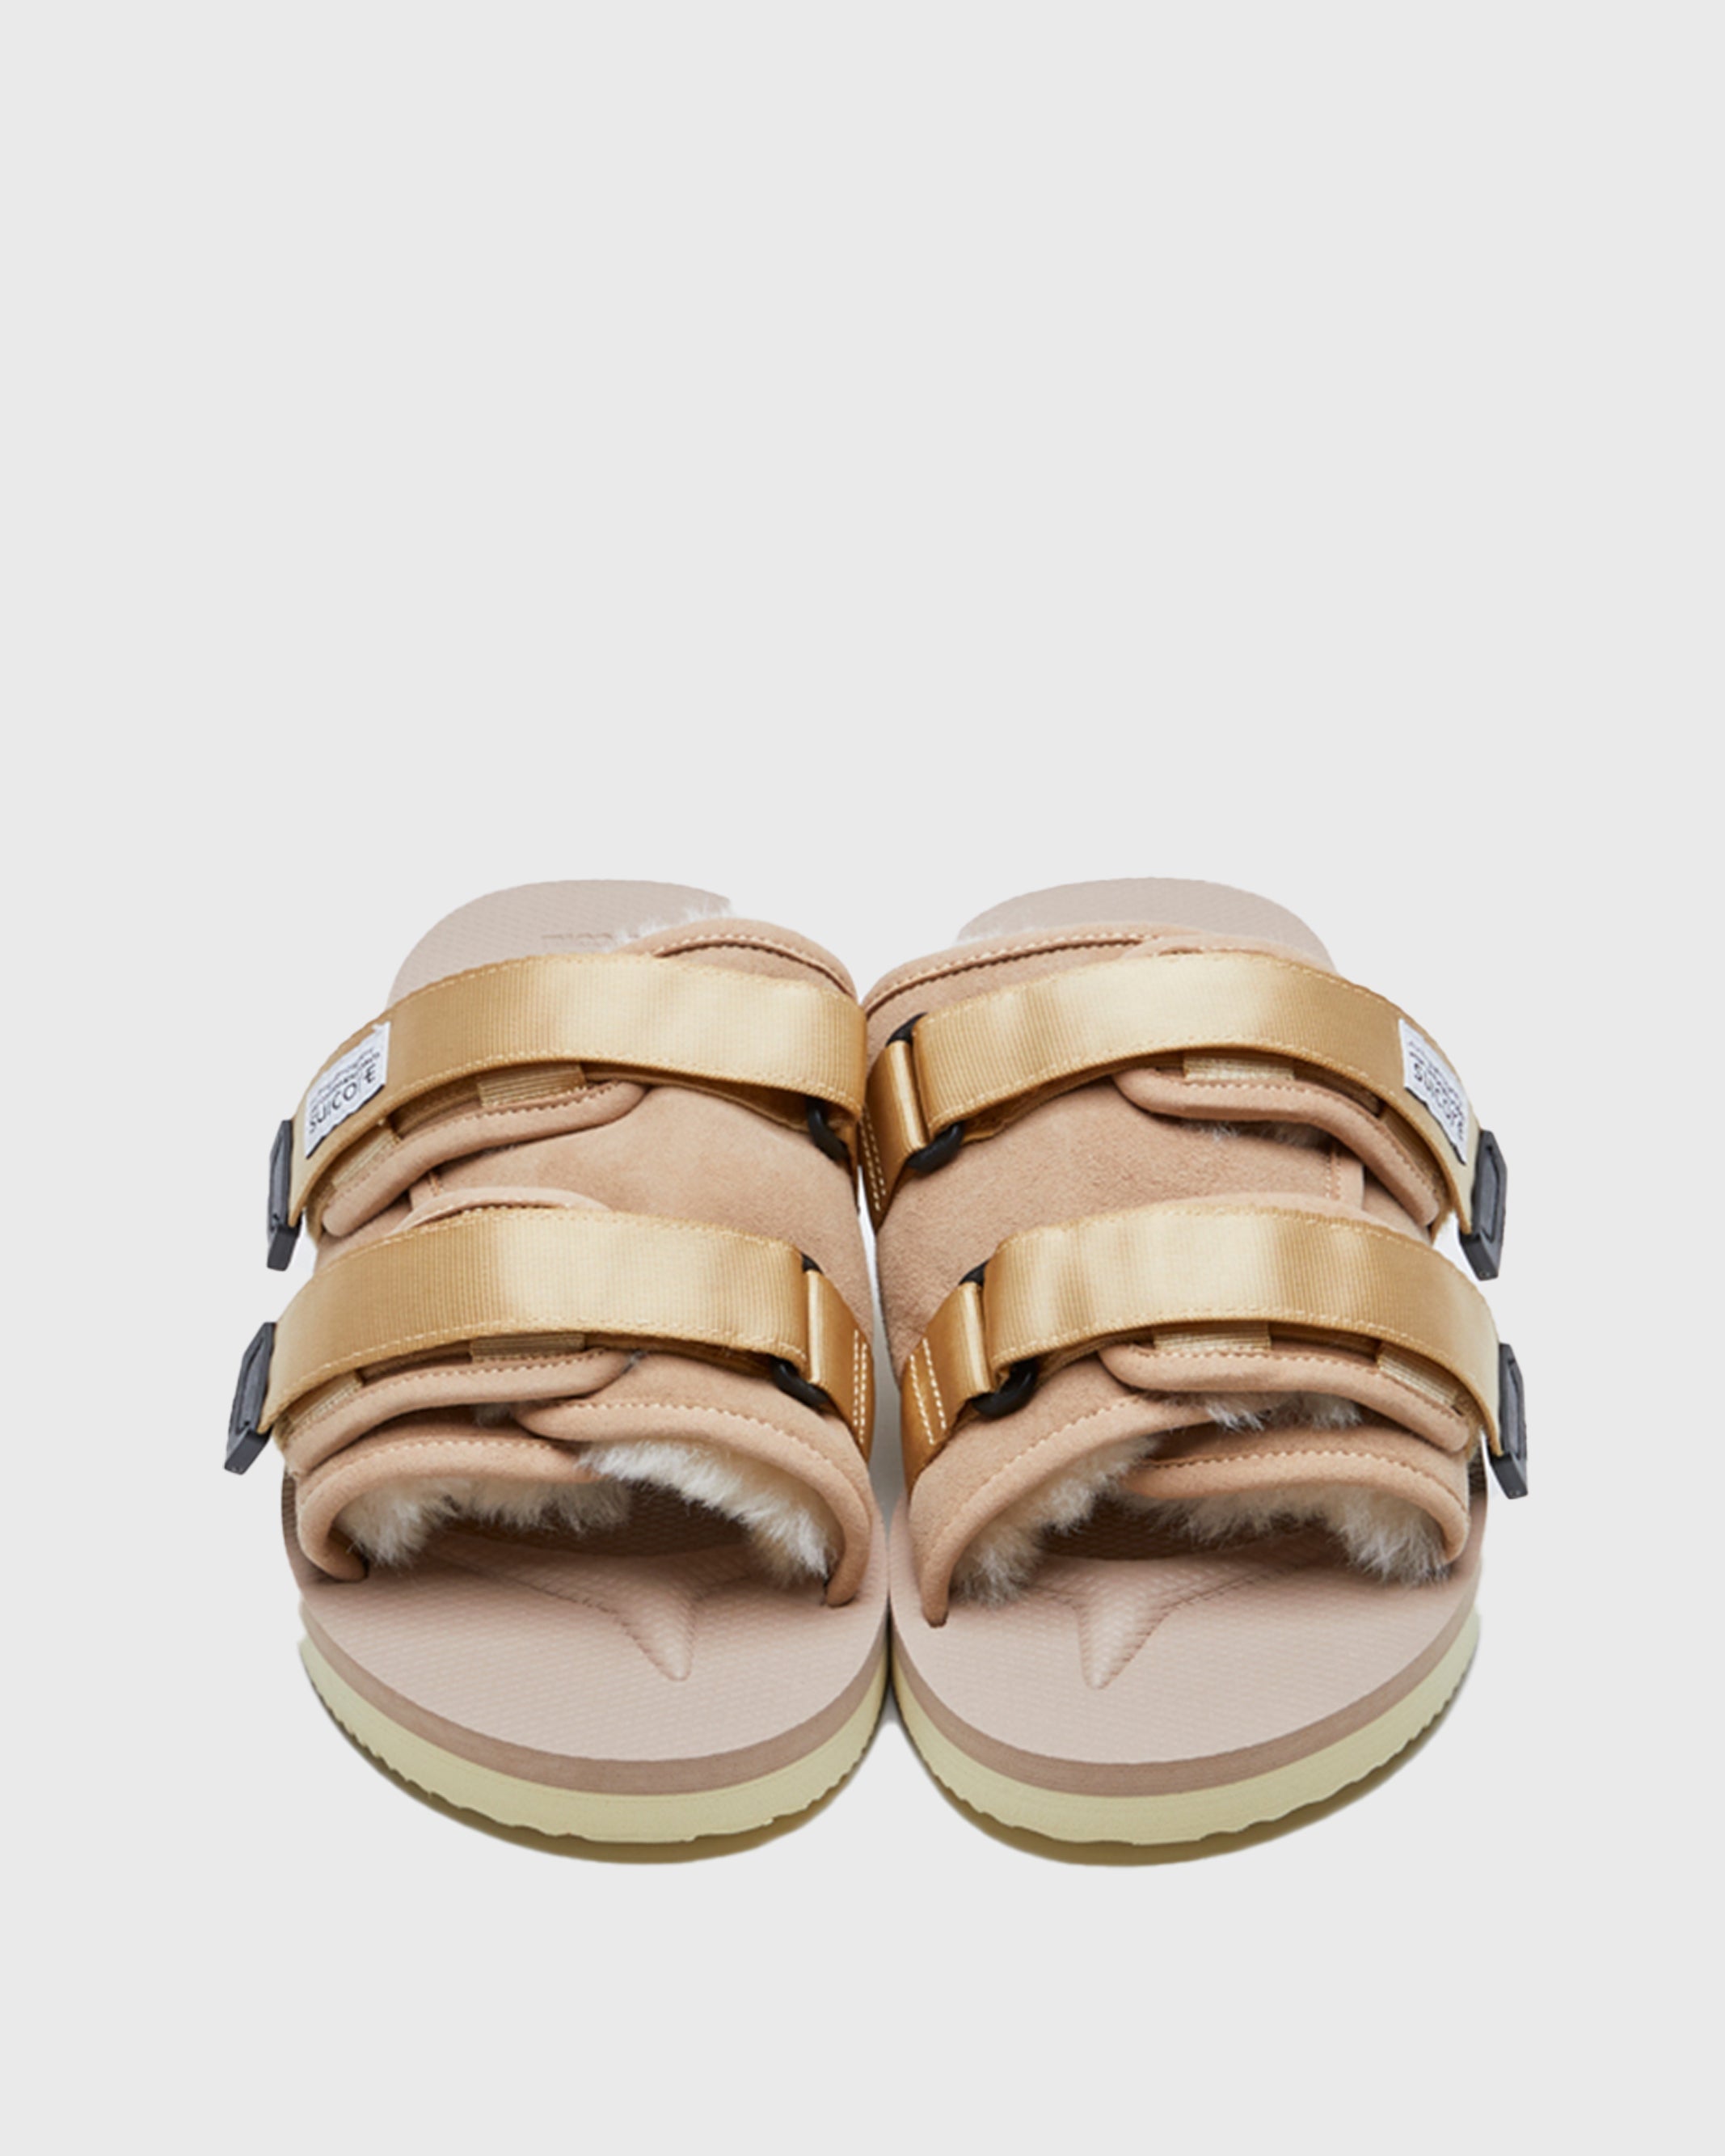 SUICOKE MOTO-M2ab in Beige OG-056M2AB | Shop from eightywingold an official brand partner for SUICOKE Canada and US.